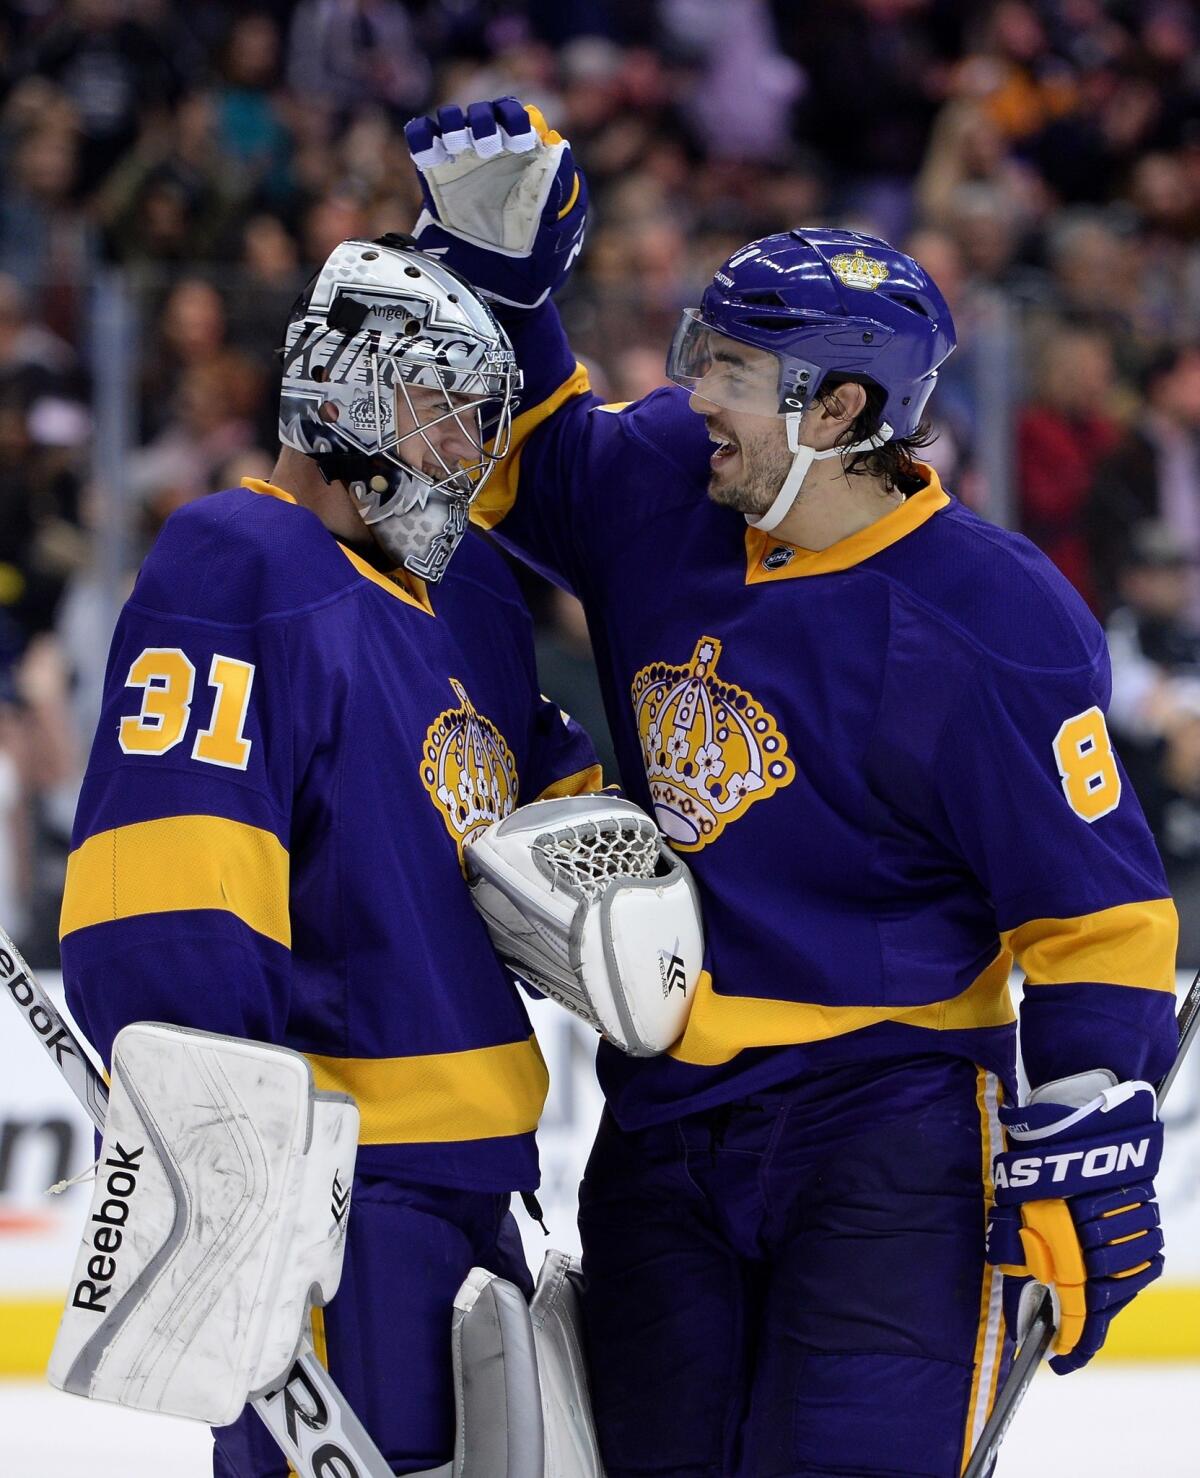 Kings goalie Martin Jones is congratulated by teammate Drew Doughty following the Kings' 3-0 victory Saturday over the New York Islanders.